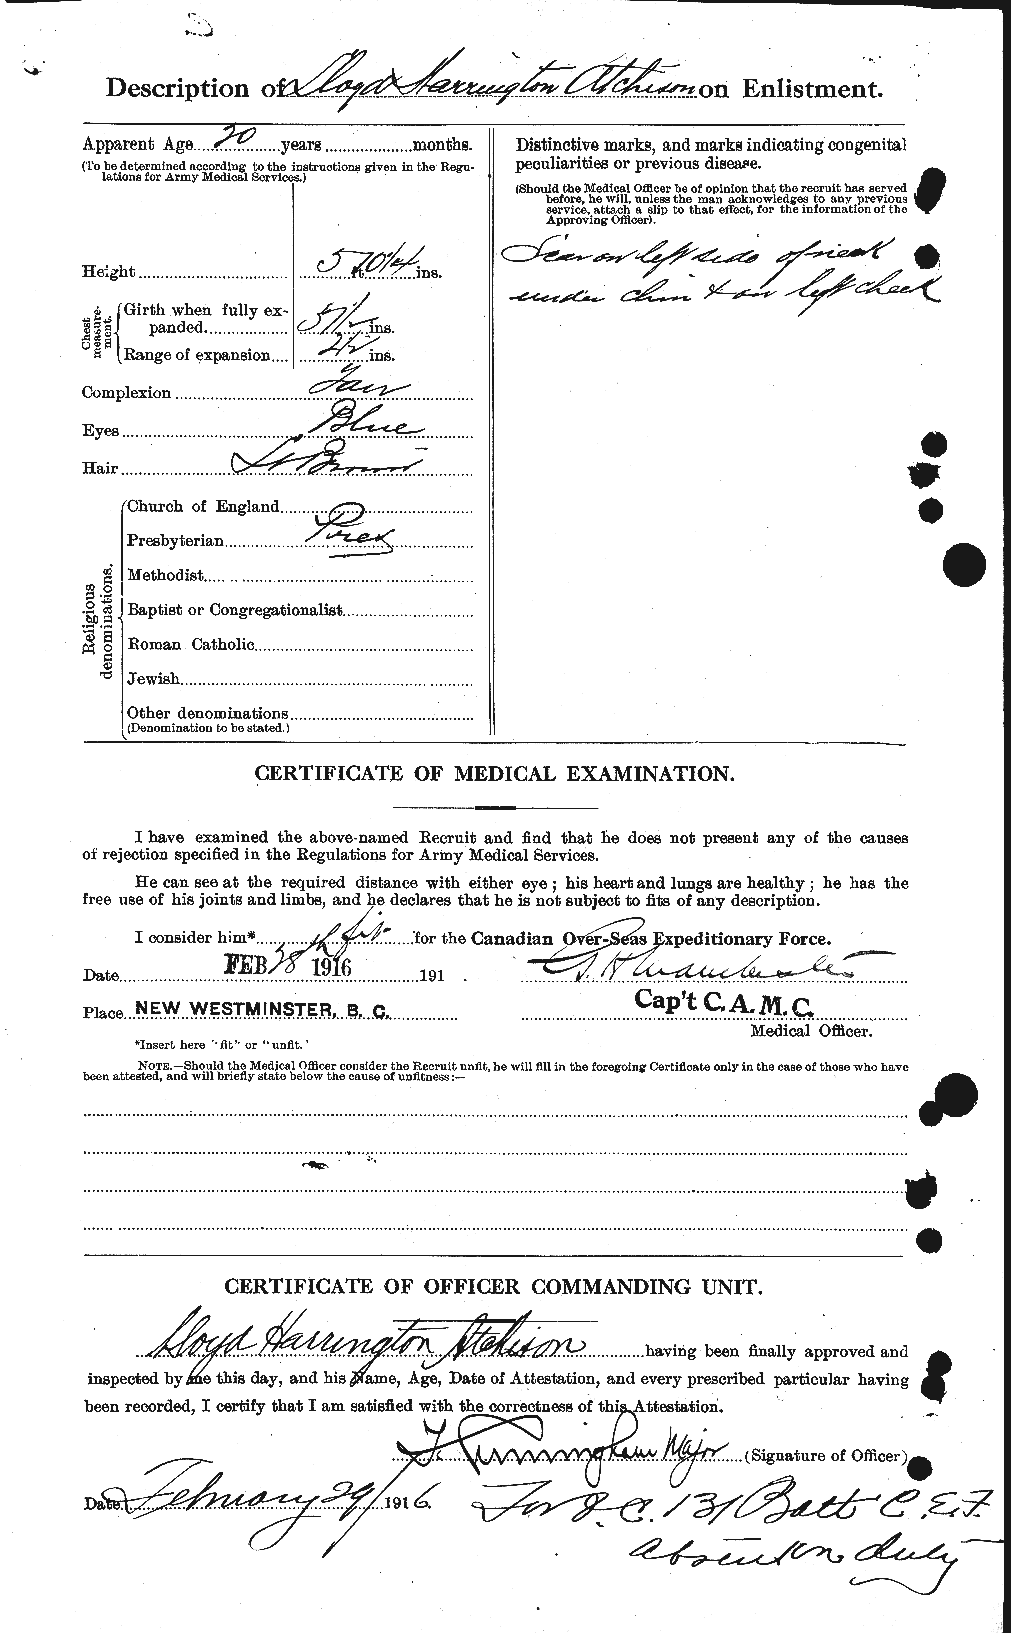 Personnel Records of the First World War - CEF 217022b